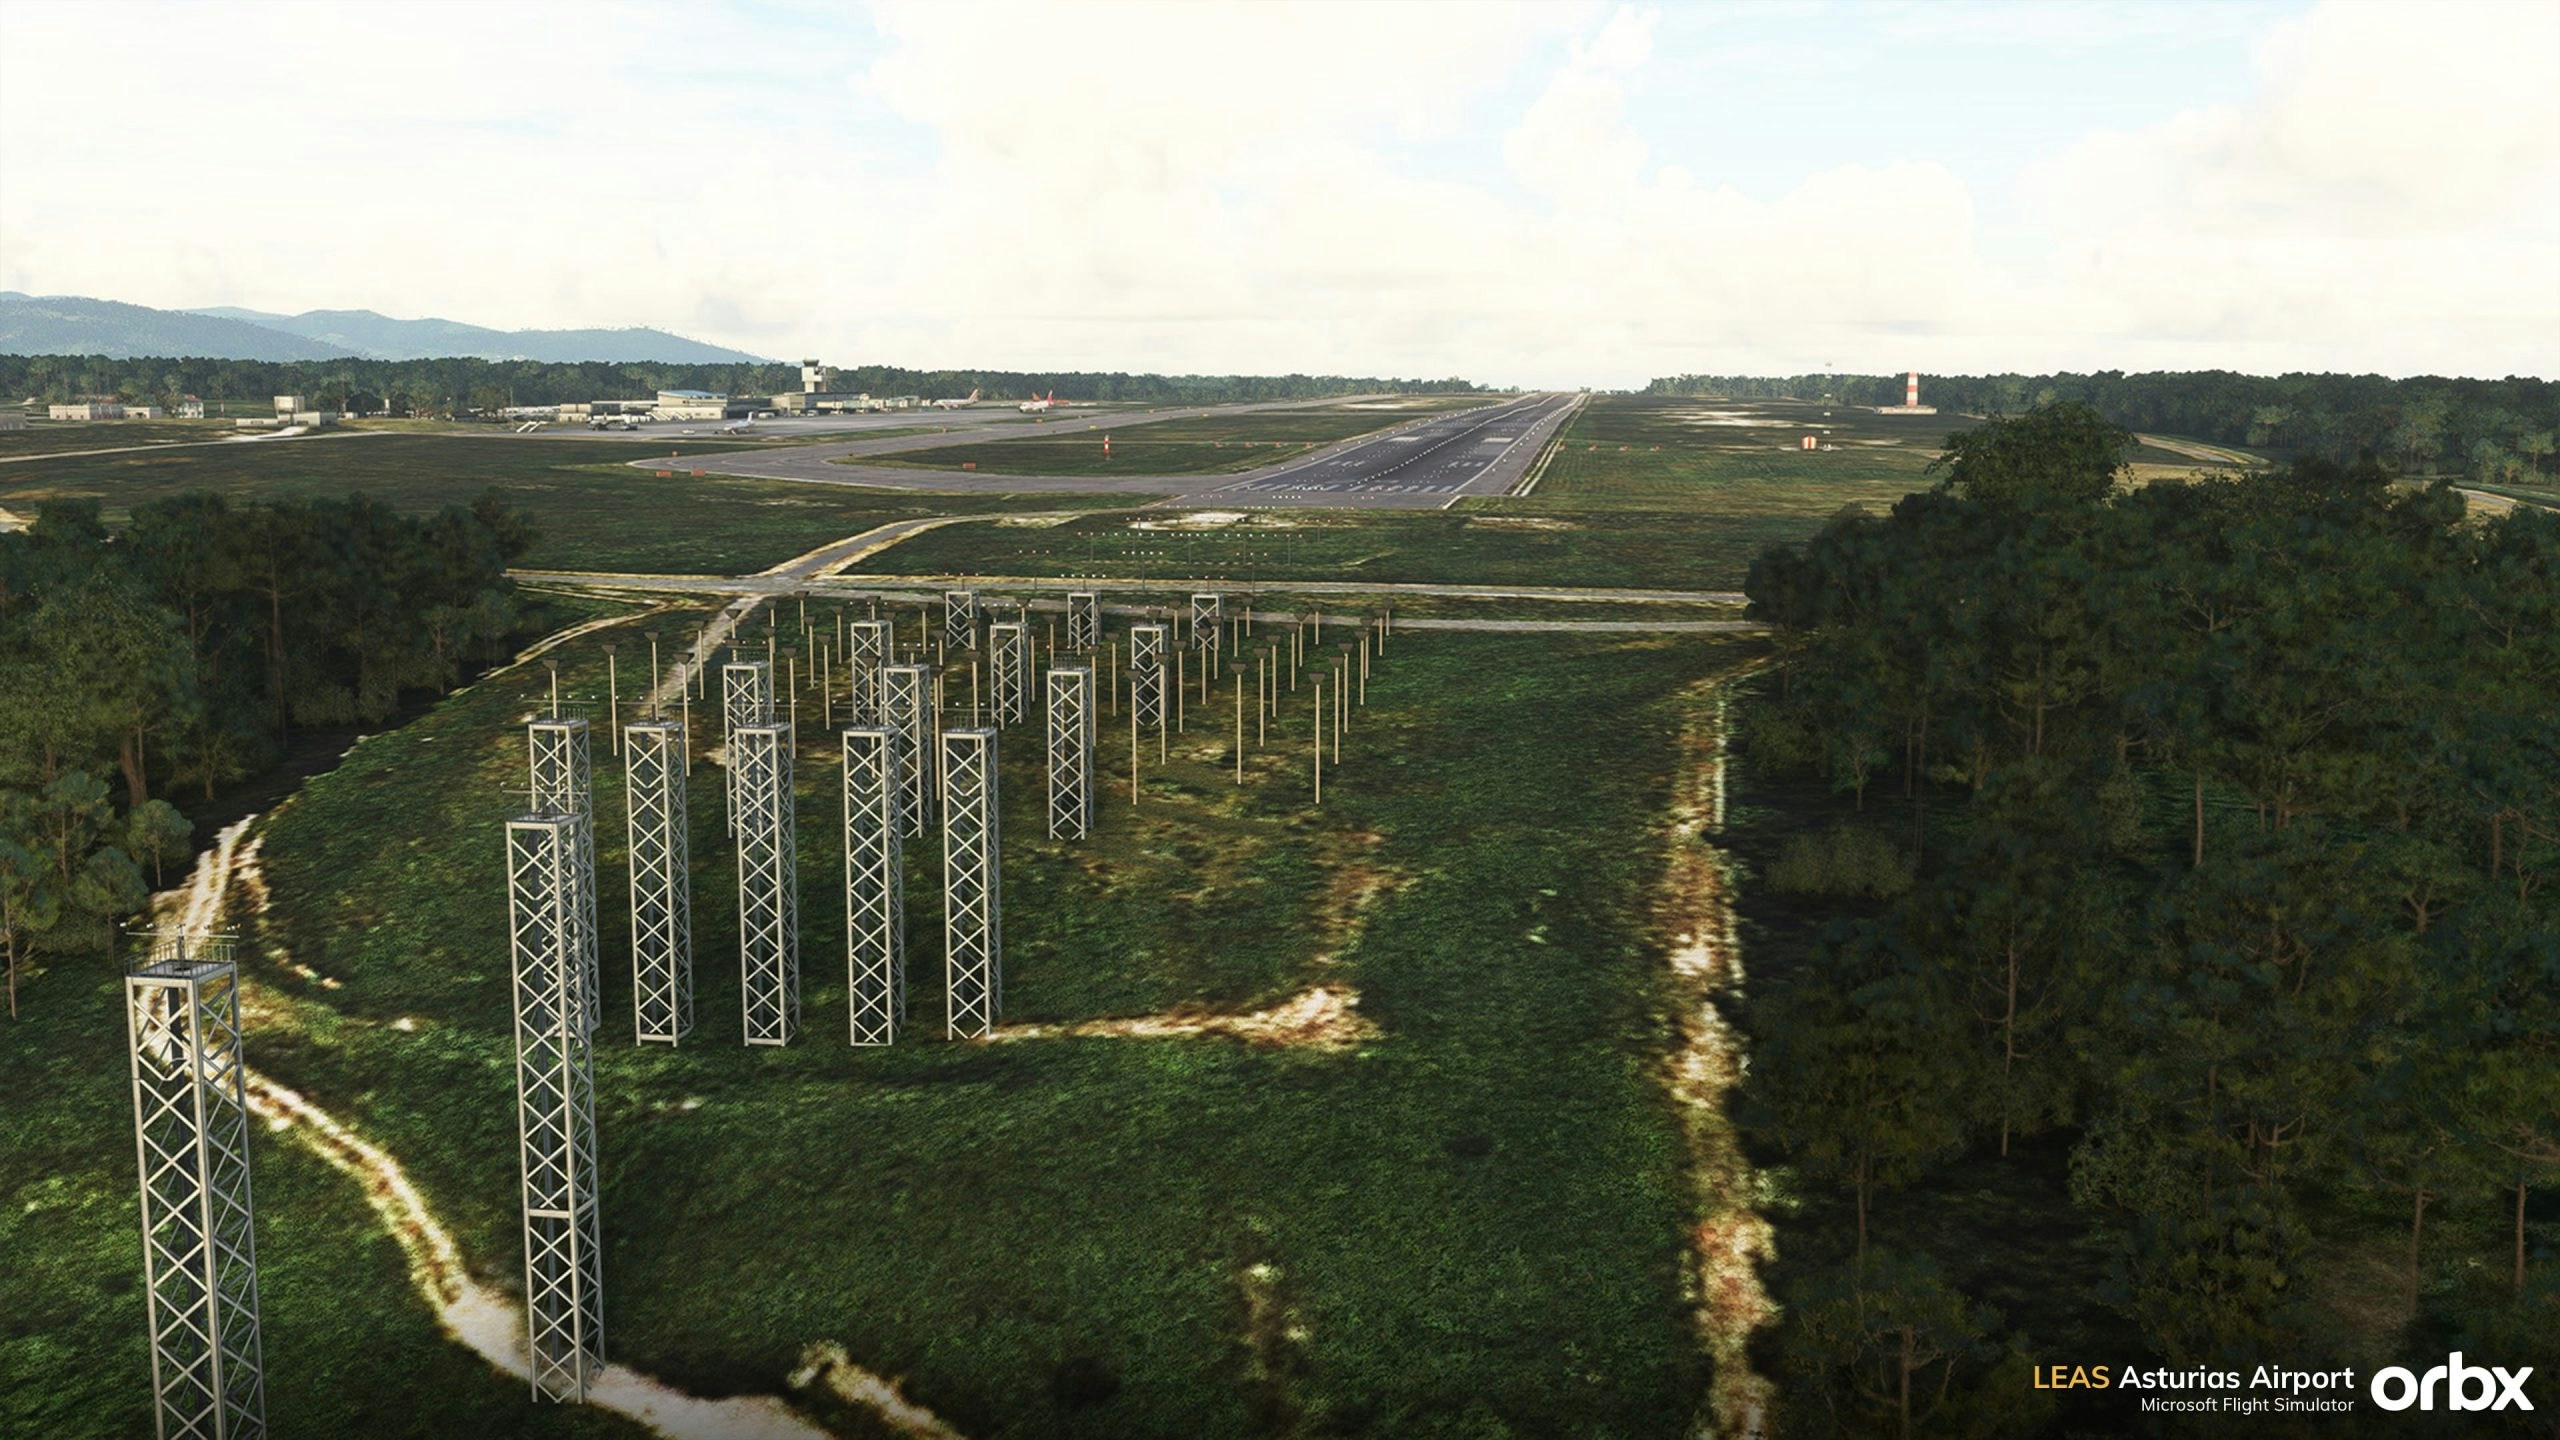 Orbx's Asturias Airport for MSFS is Now Available for MSFS